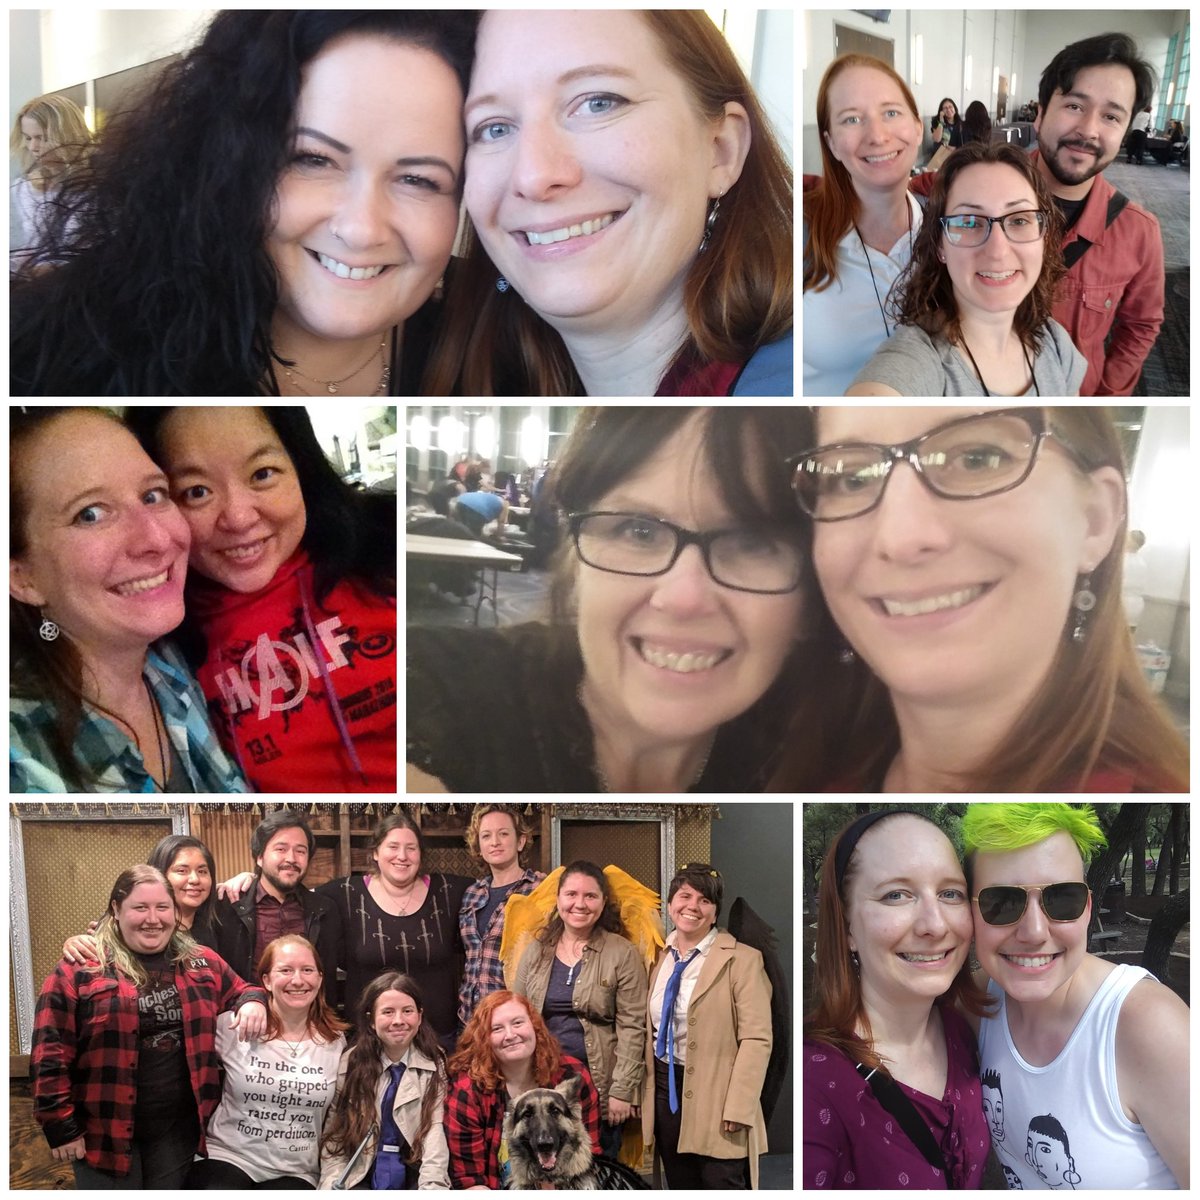 Of course this thread can't capture every moment or every fantastic person I've met along the way. But I hope you all know, even if we didn't meet in person, you have shown me kindness in spades and I wish you all joy and happiness (and fandom dreams) in the decades to come! 